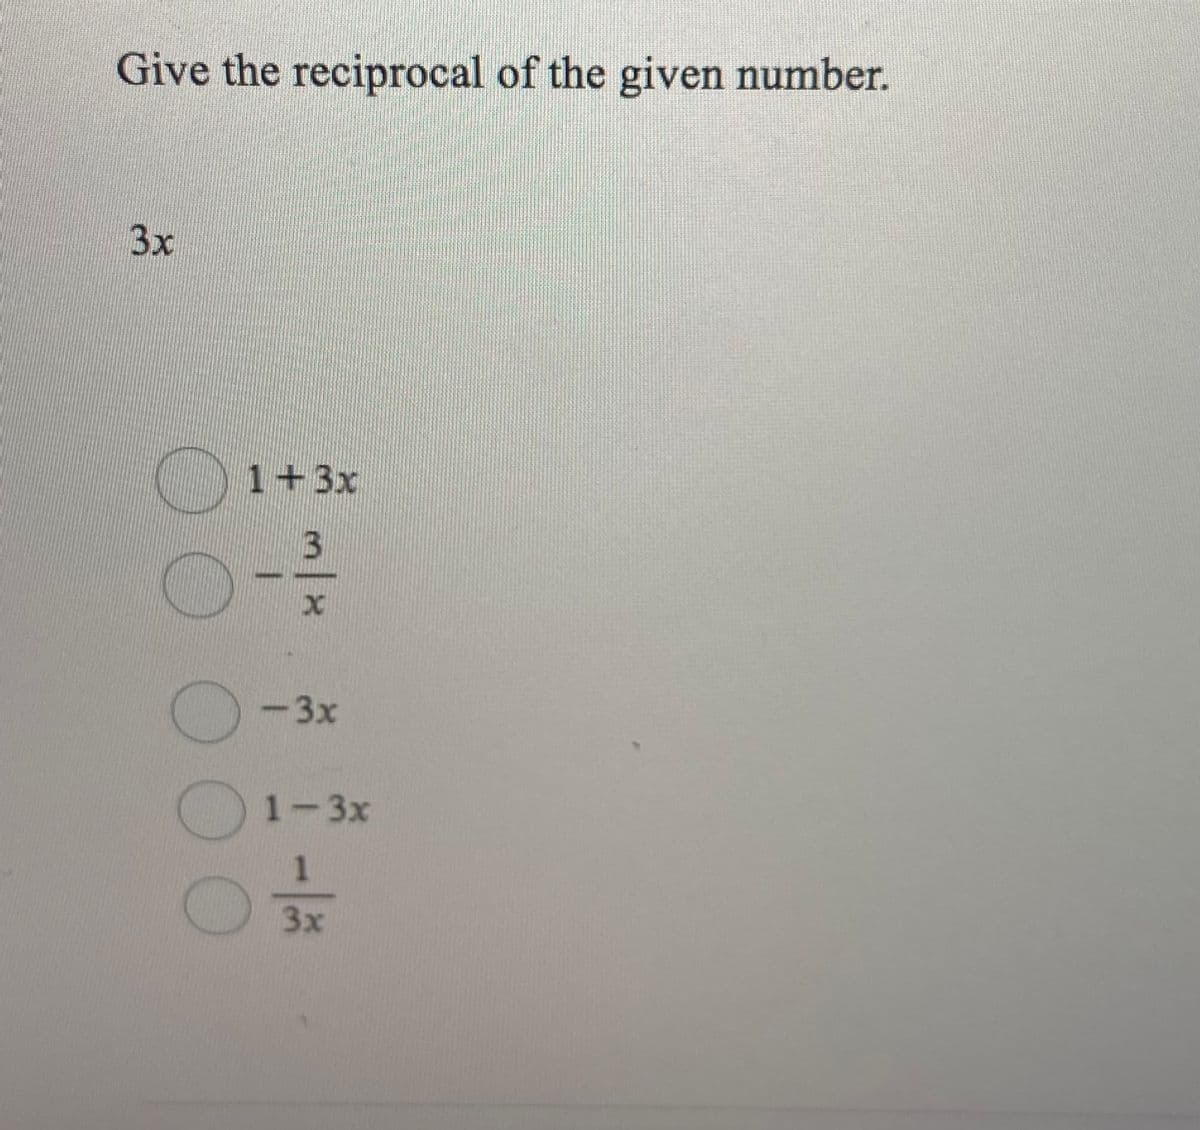 Give the reciprocal of the given number.
3x
1+3x
-3x
1-3x
1.
3x
/-
O000
